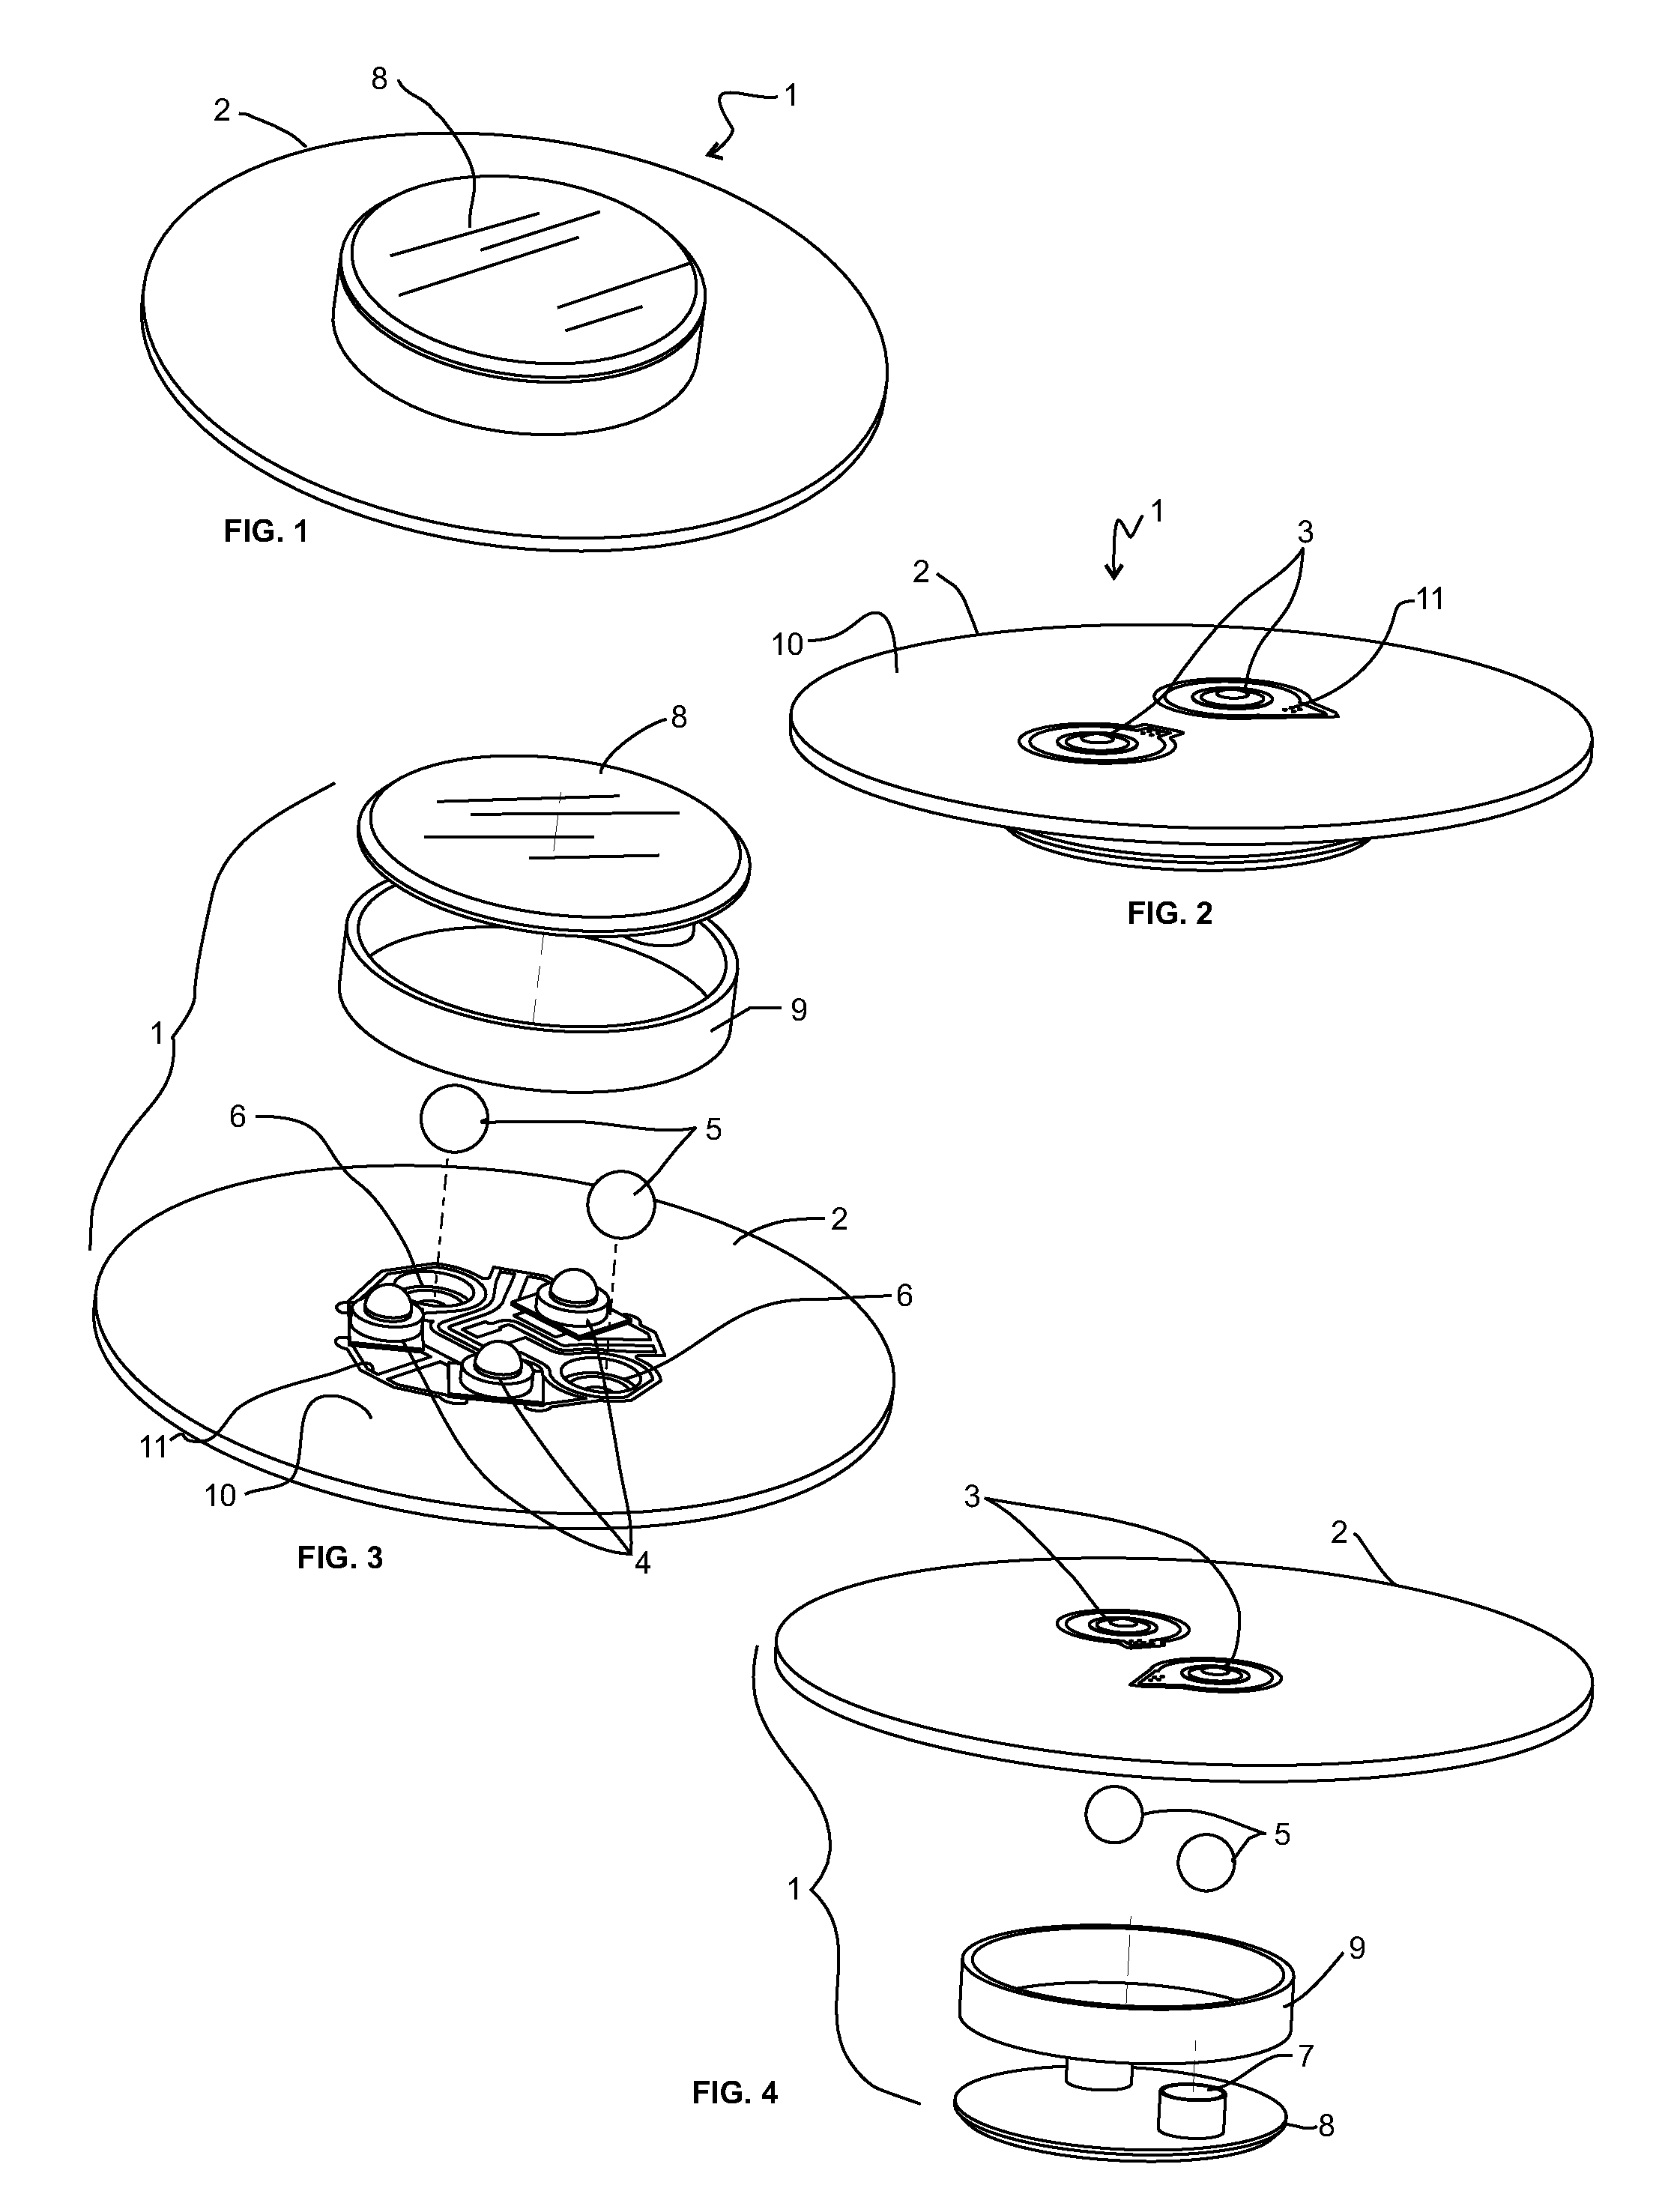 Modular lighting system and method employing loosely constrained magnetic structures